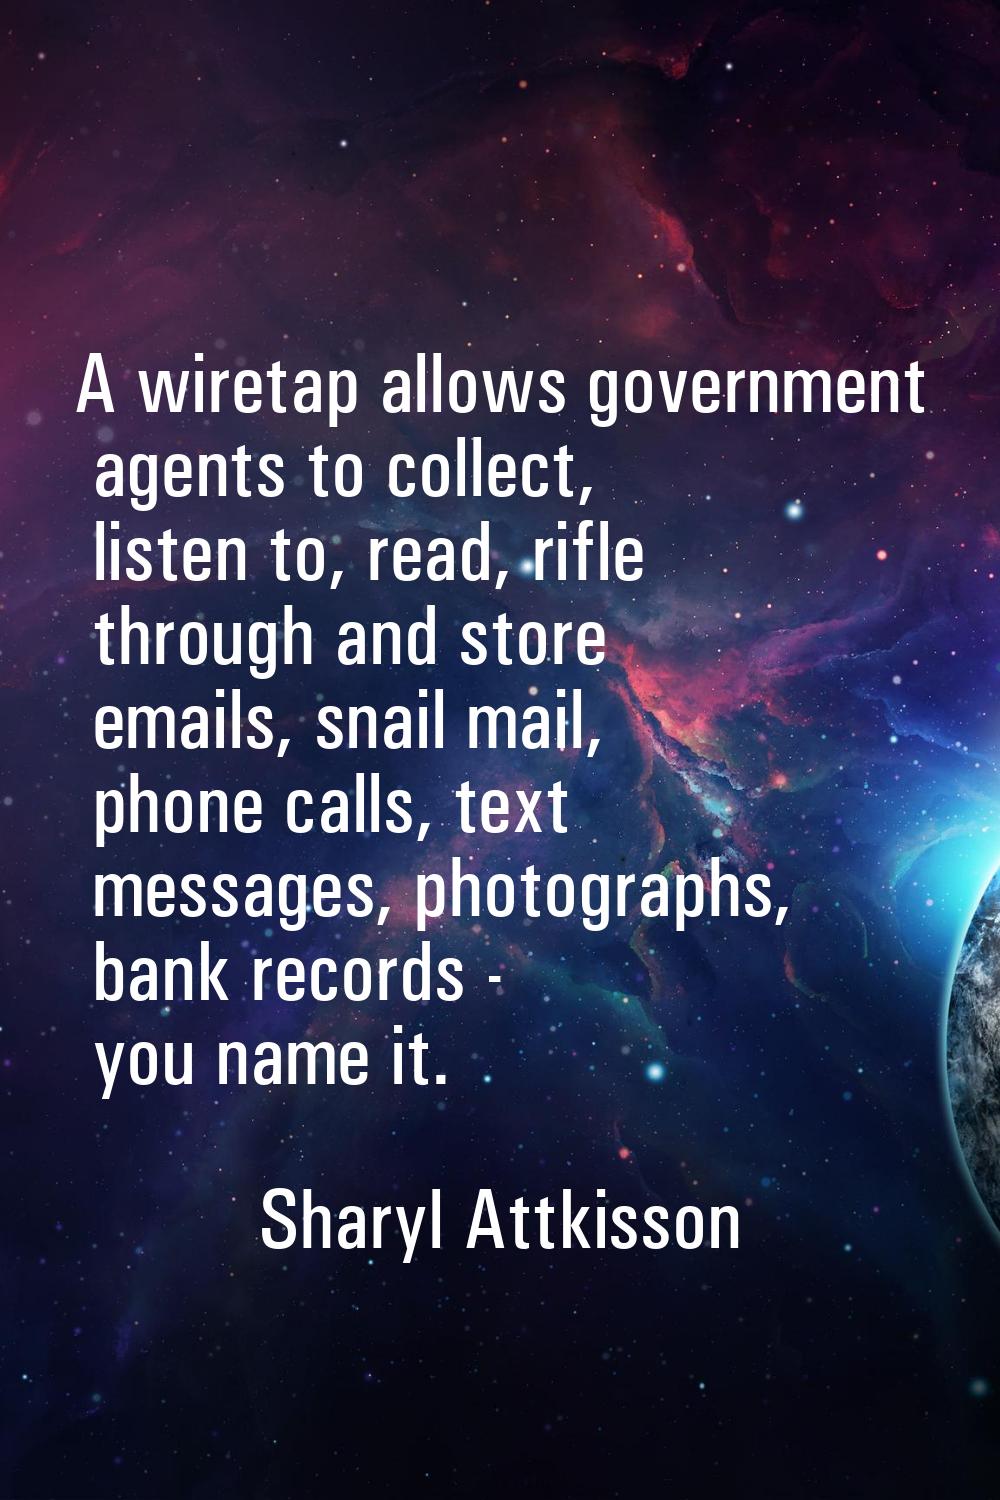 A wiretap allows government agents to collect, listen to, read, rifle through and store emails, sna